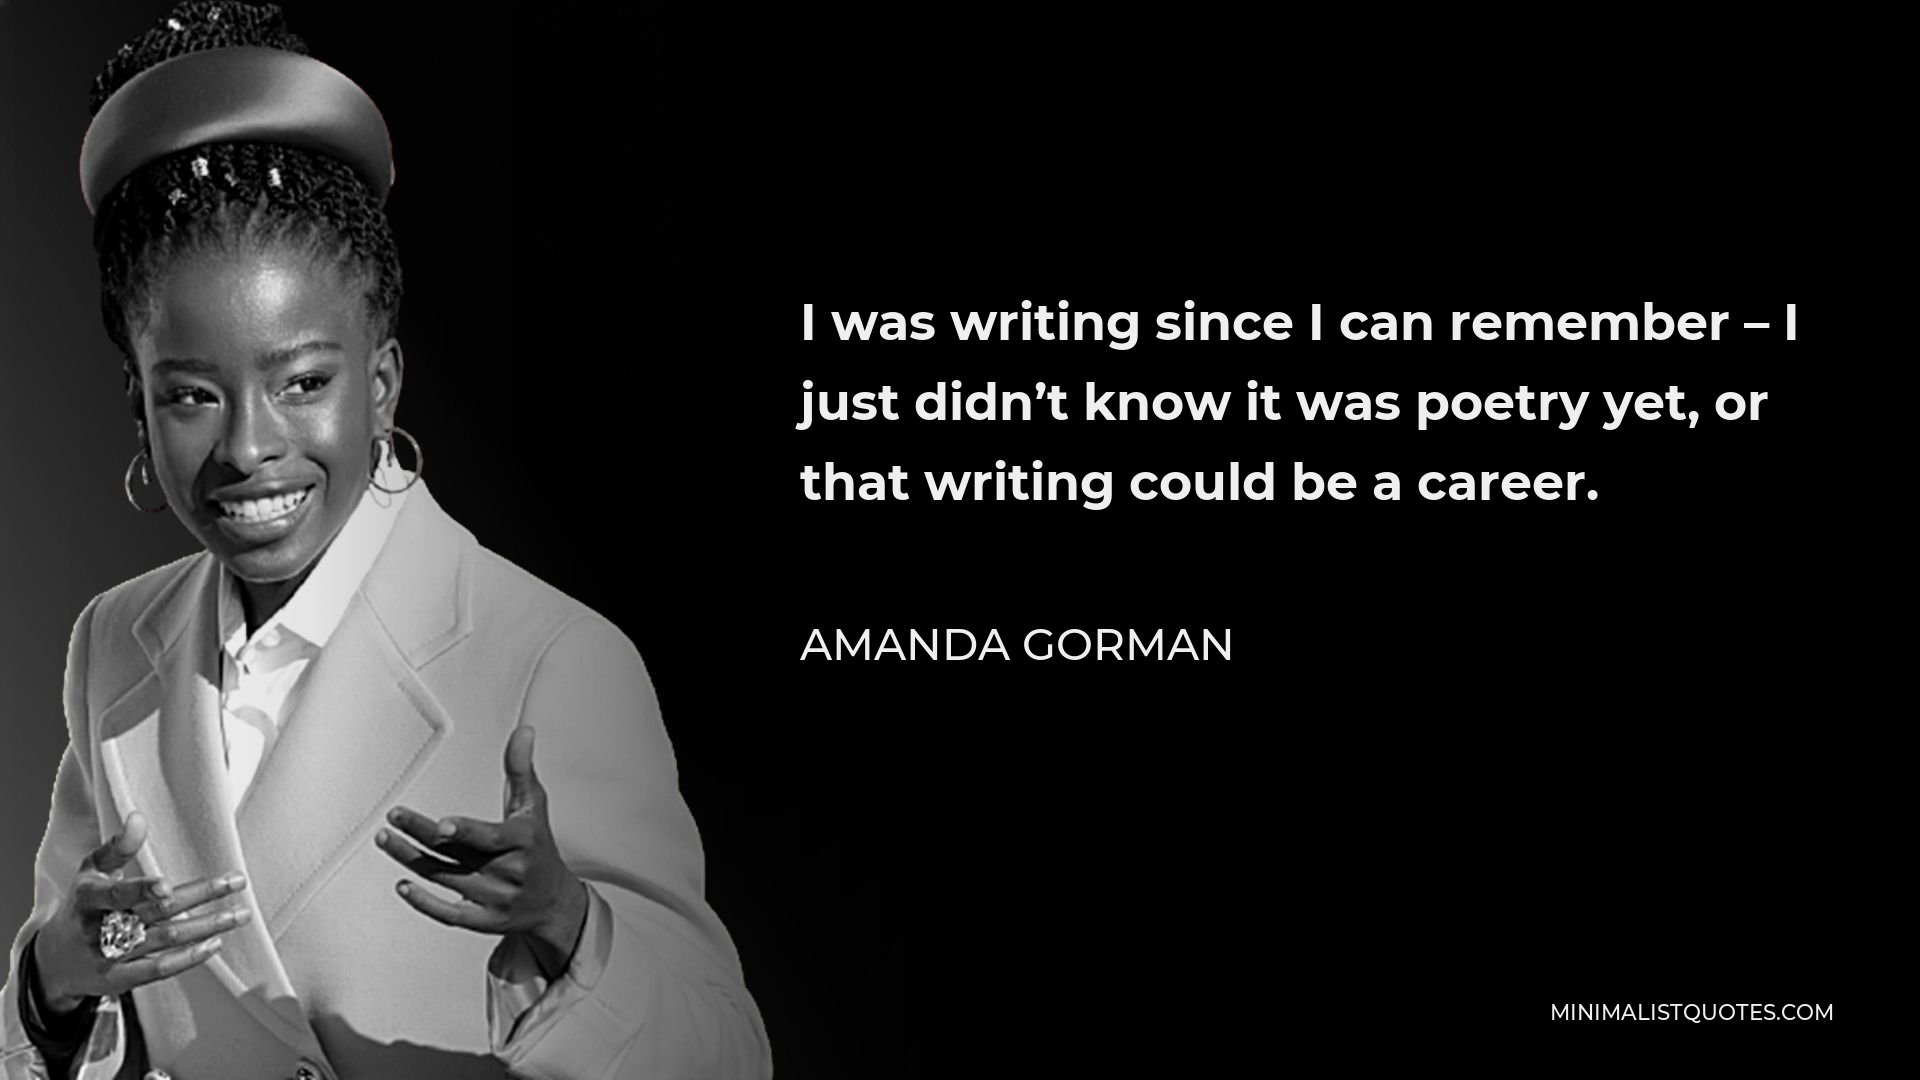 Amanda Gorman Quote - I was writing since I can remember – I just didn’t know it was poetry yet, or that writing could be a career.